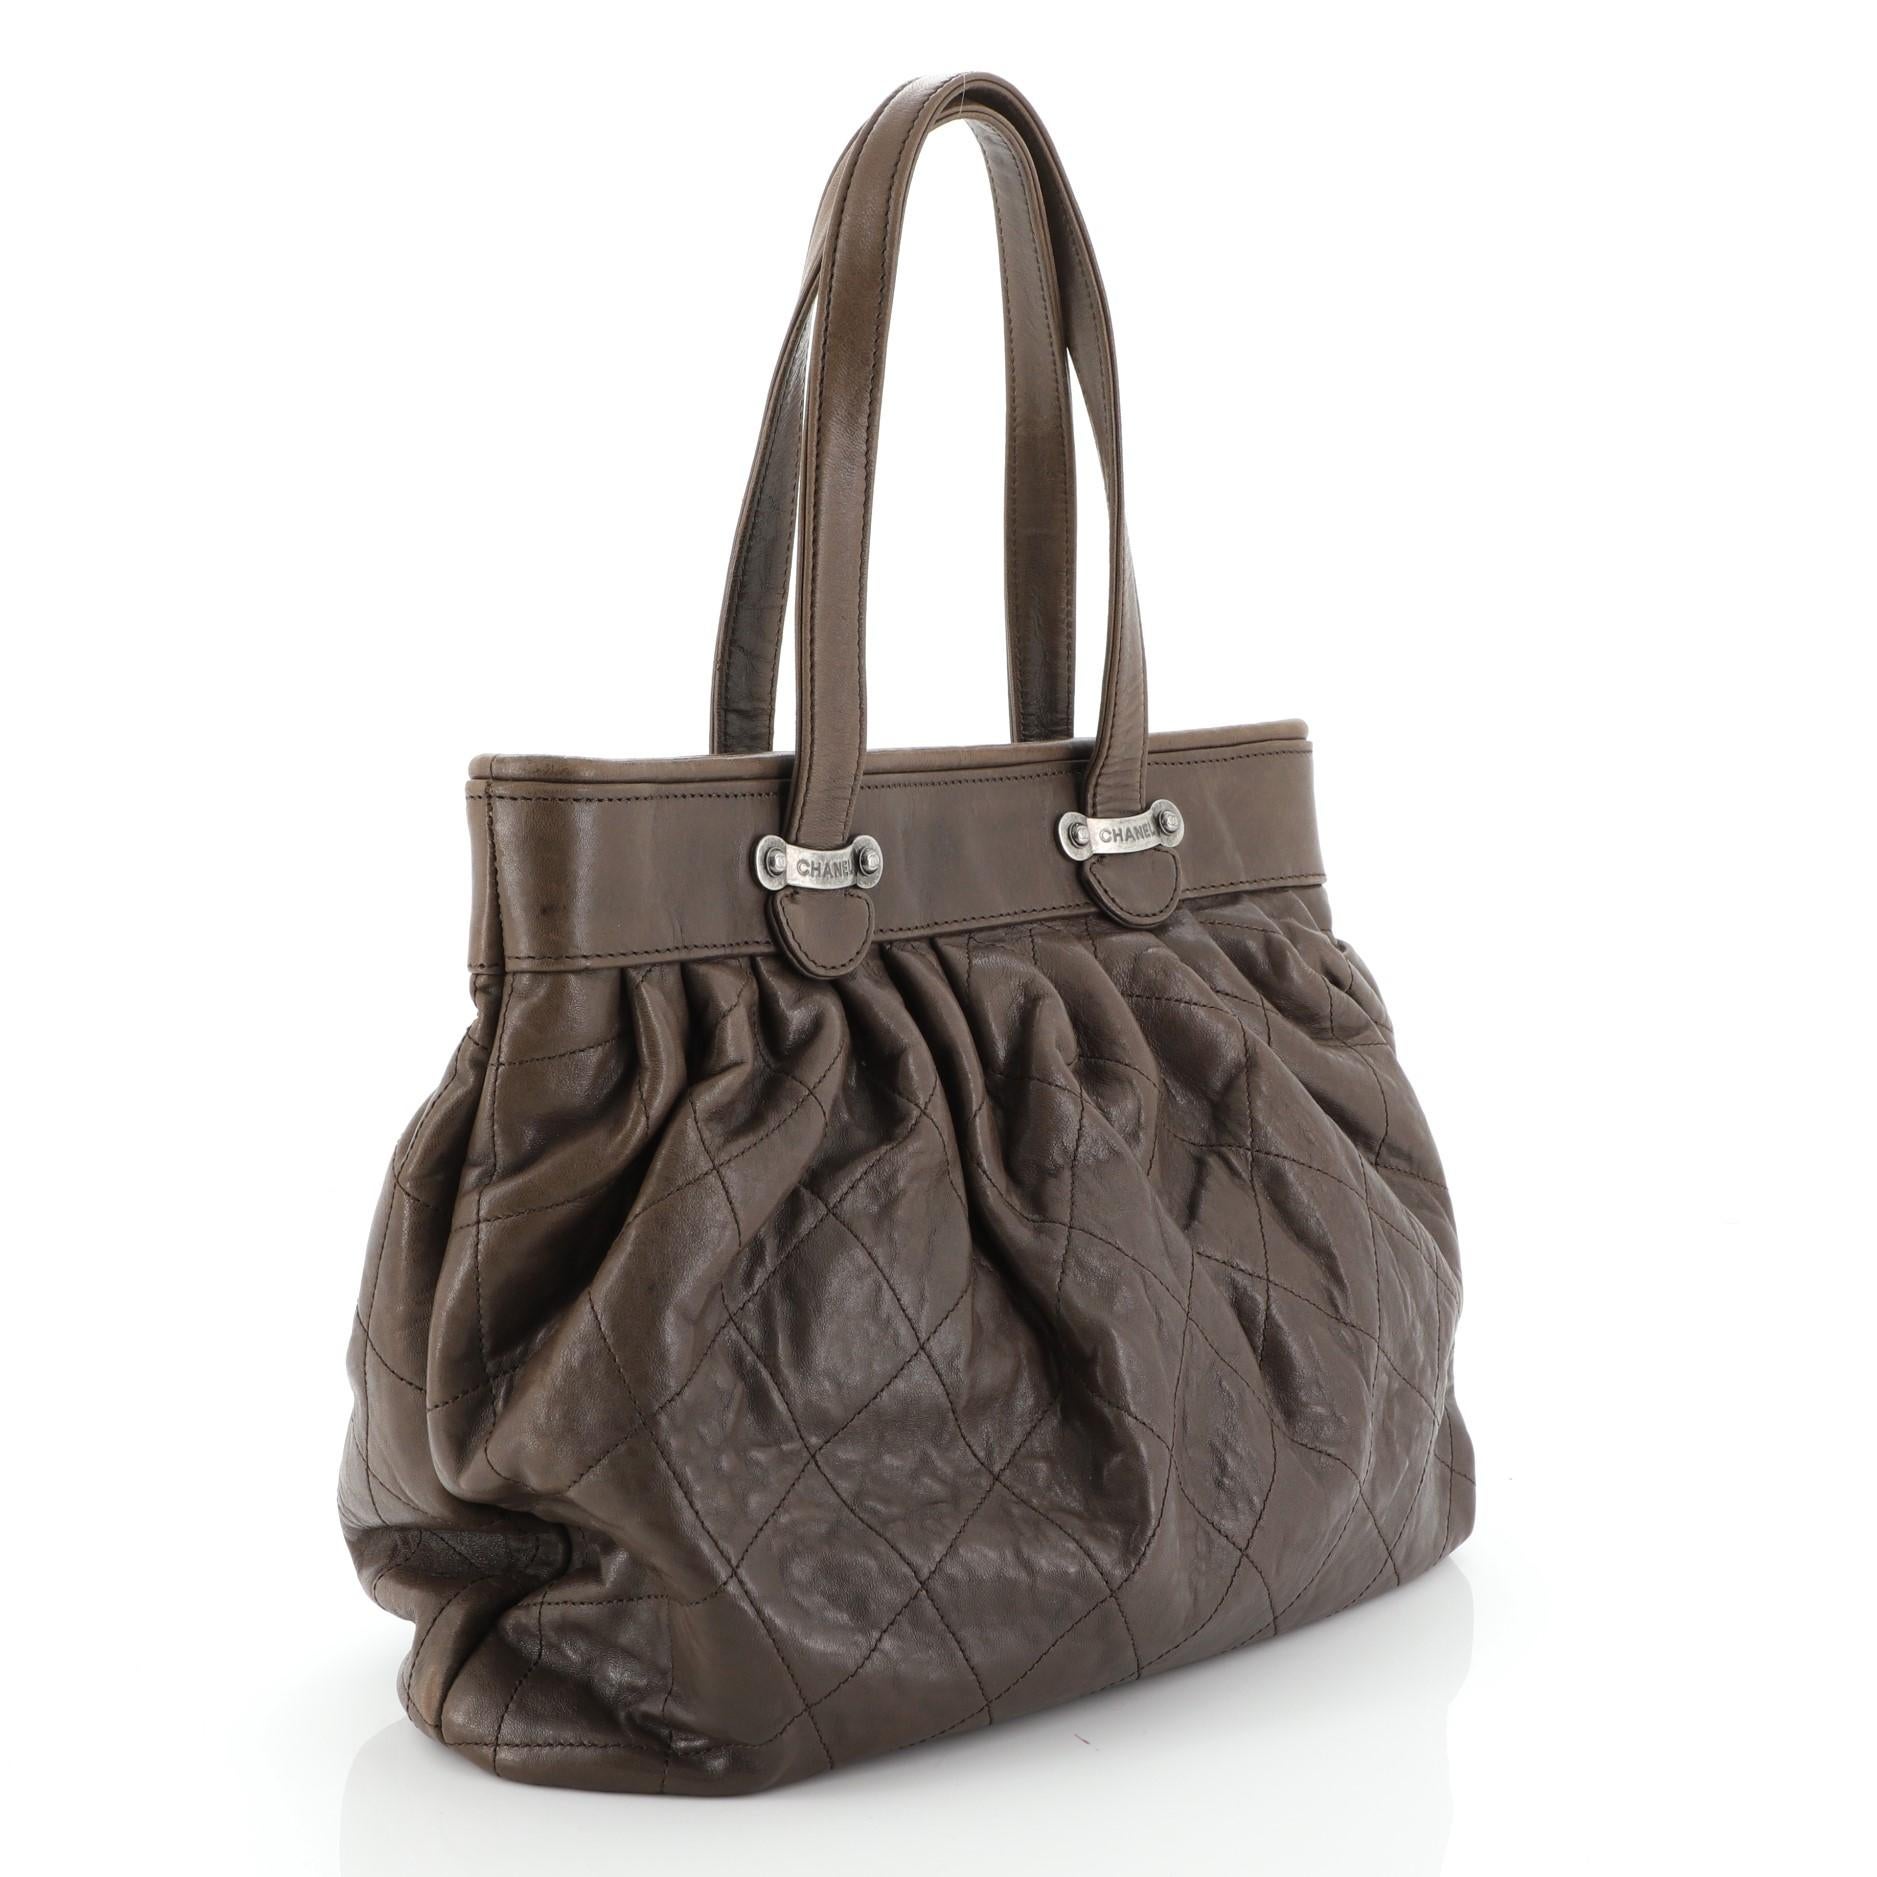 This Chanel Vintage Pleated Tote Quilted Calfskin Large, crafted from brown quilted calfskin leather, features flat leather straps, pleated silhouette and aged silver-tone hardware. Its cinch closure opens to a gray satin interior. Hologram sticker